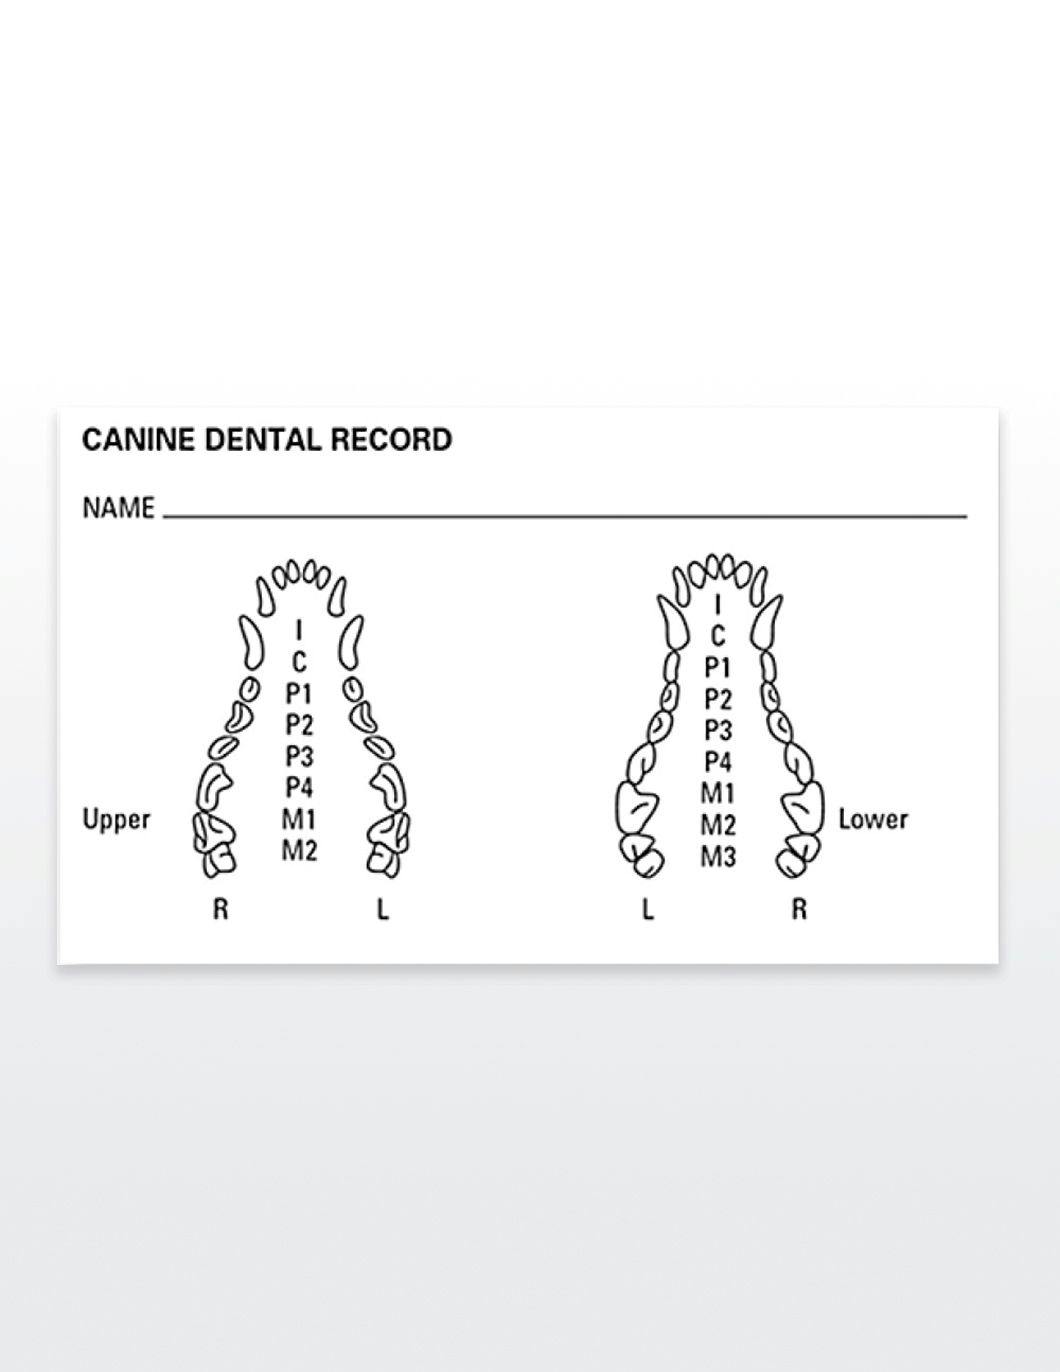 medical-record-labels-canine-dental-record